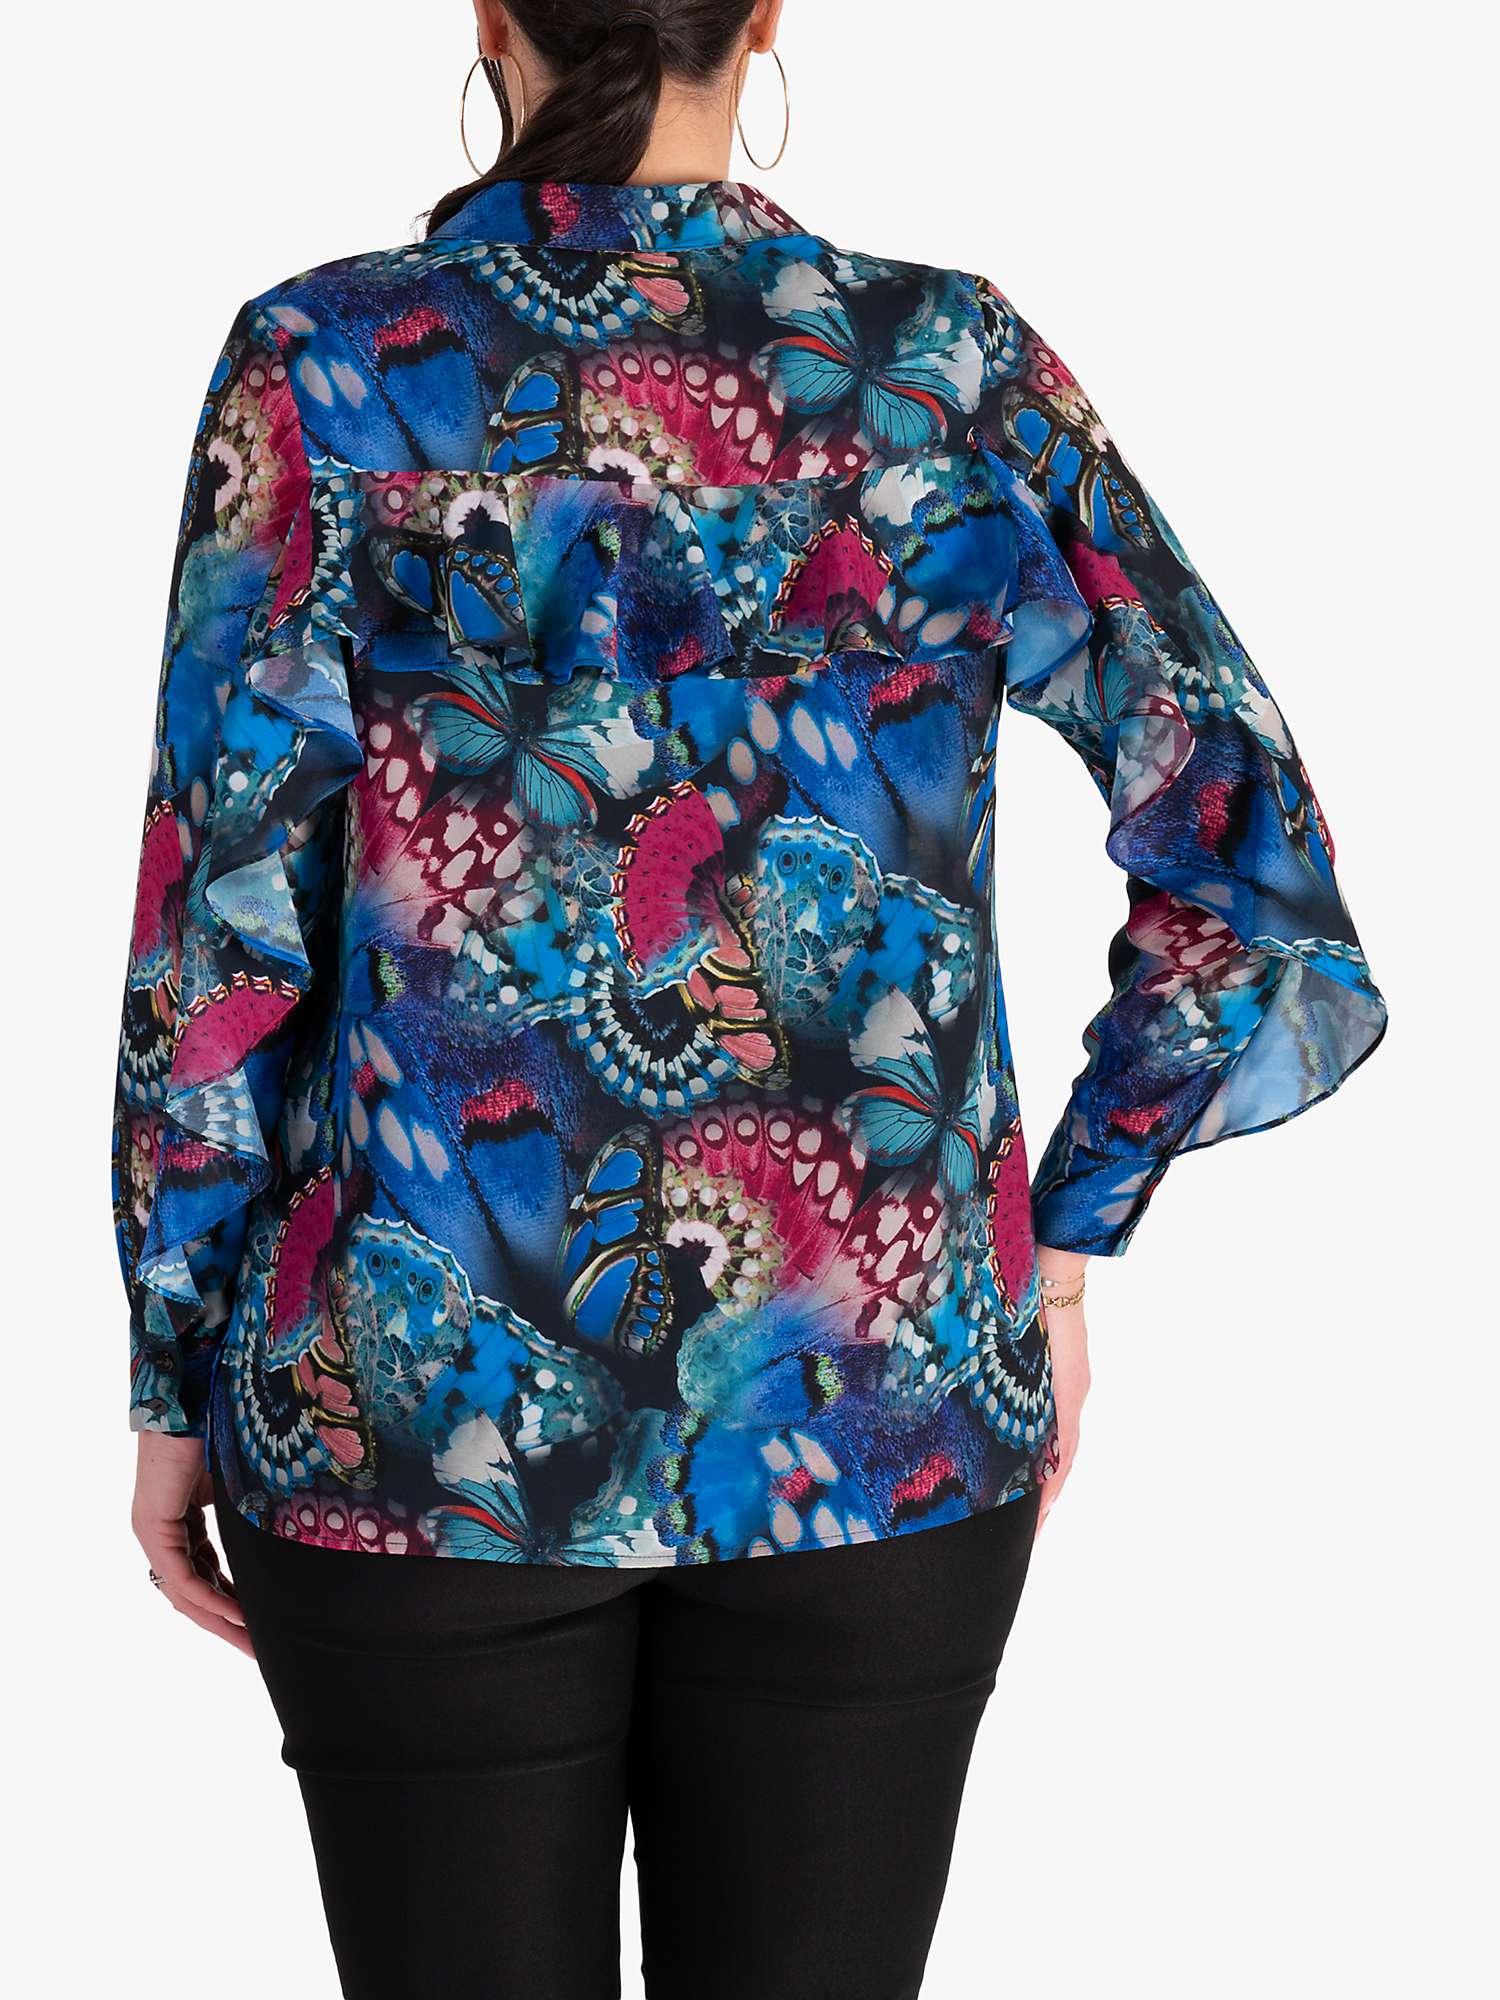 Buy chesca Butterfly Print Blouse, Multi Online at johnlewis.com